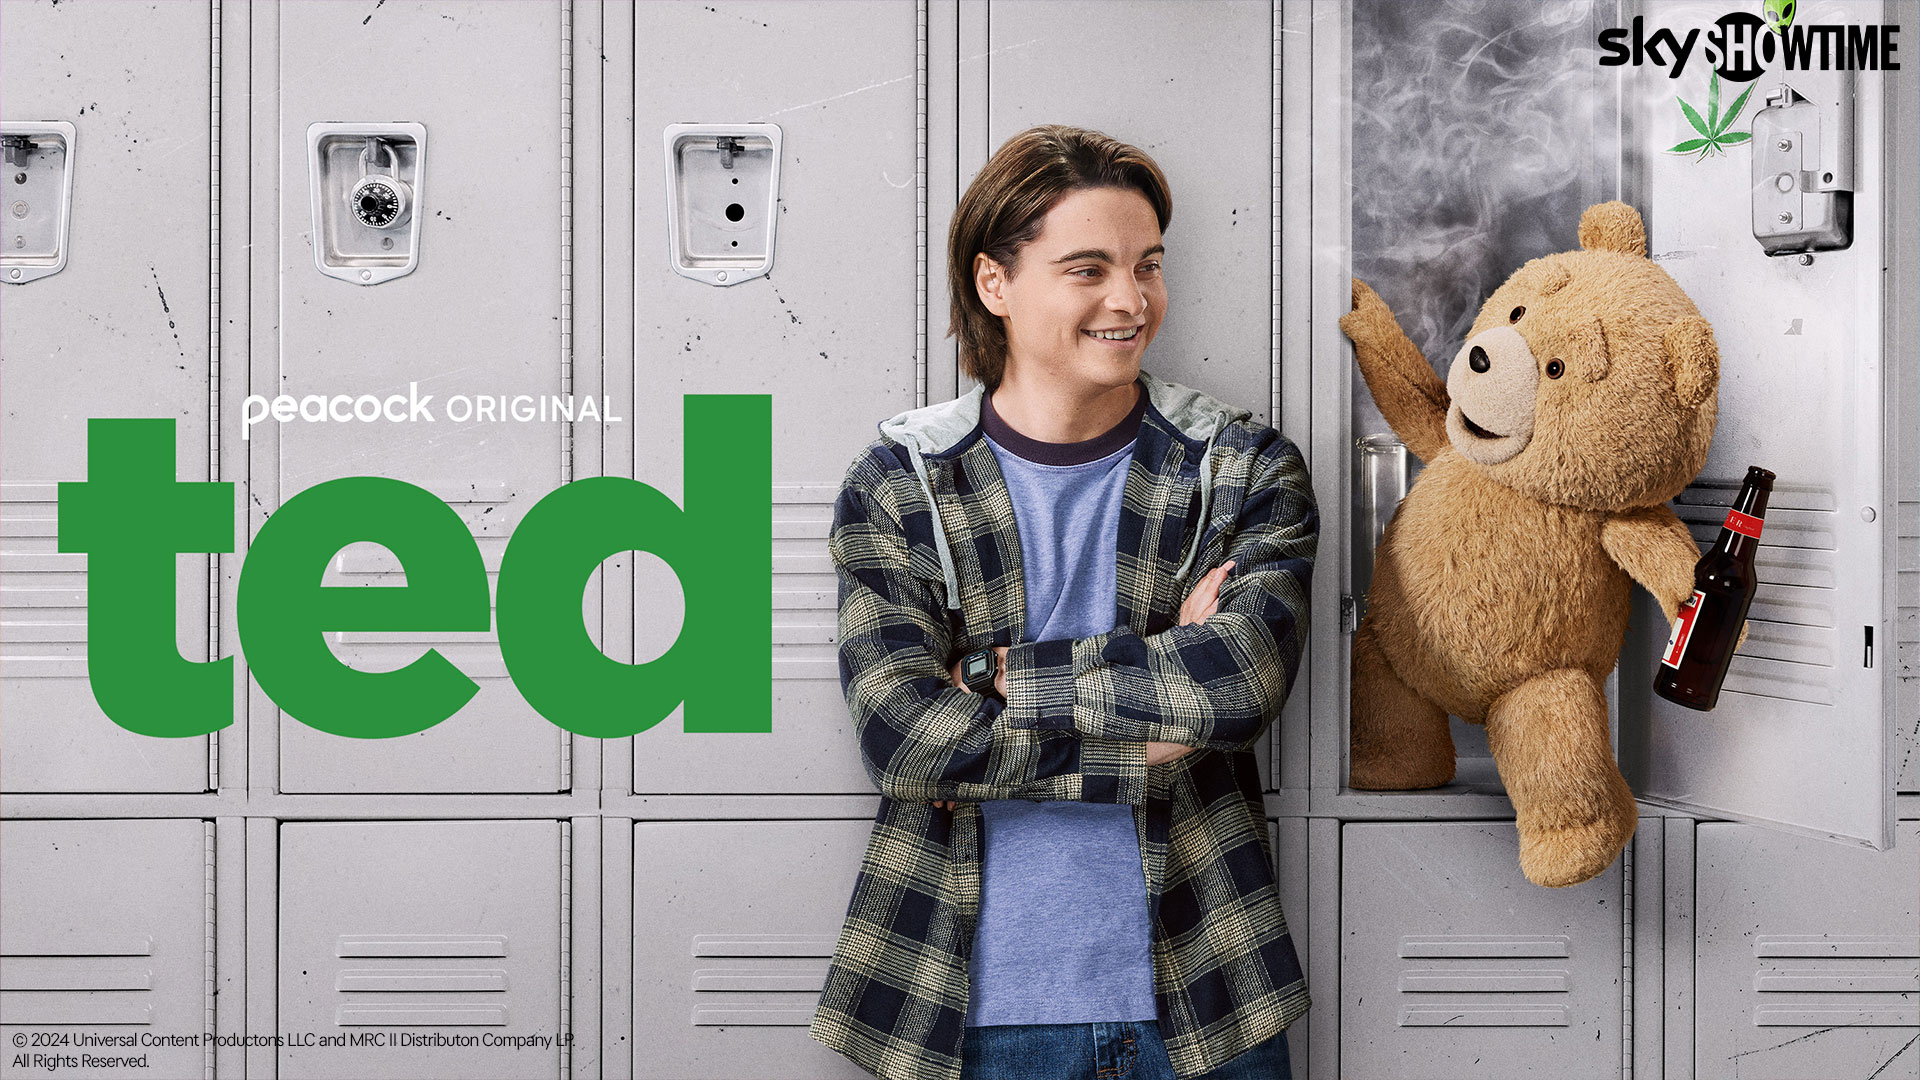 Ted S01 Branded Key Art 1920x1080